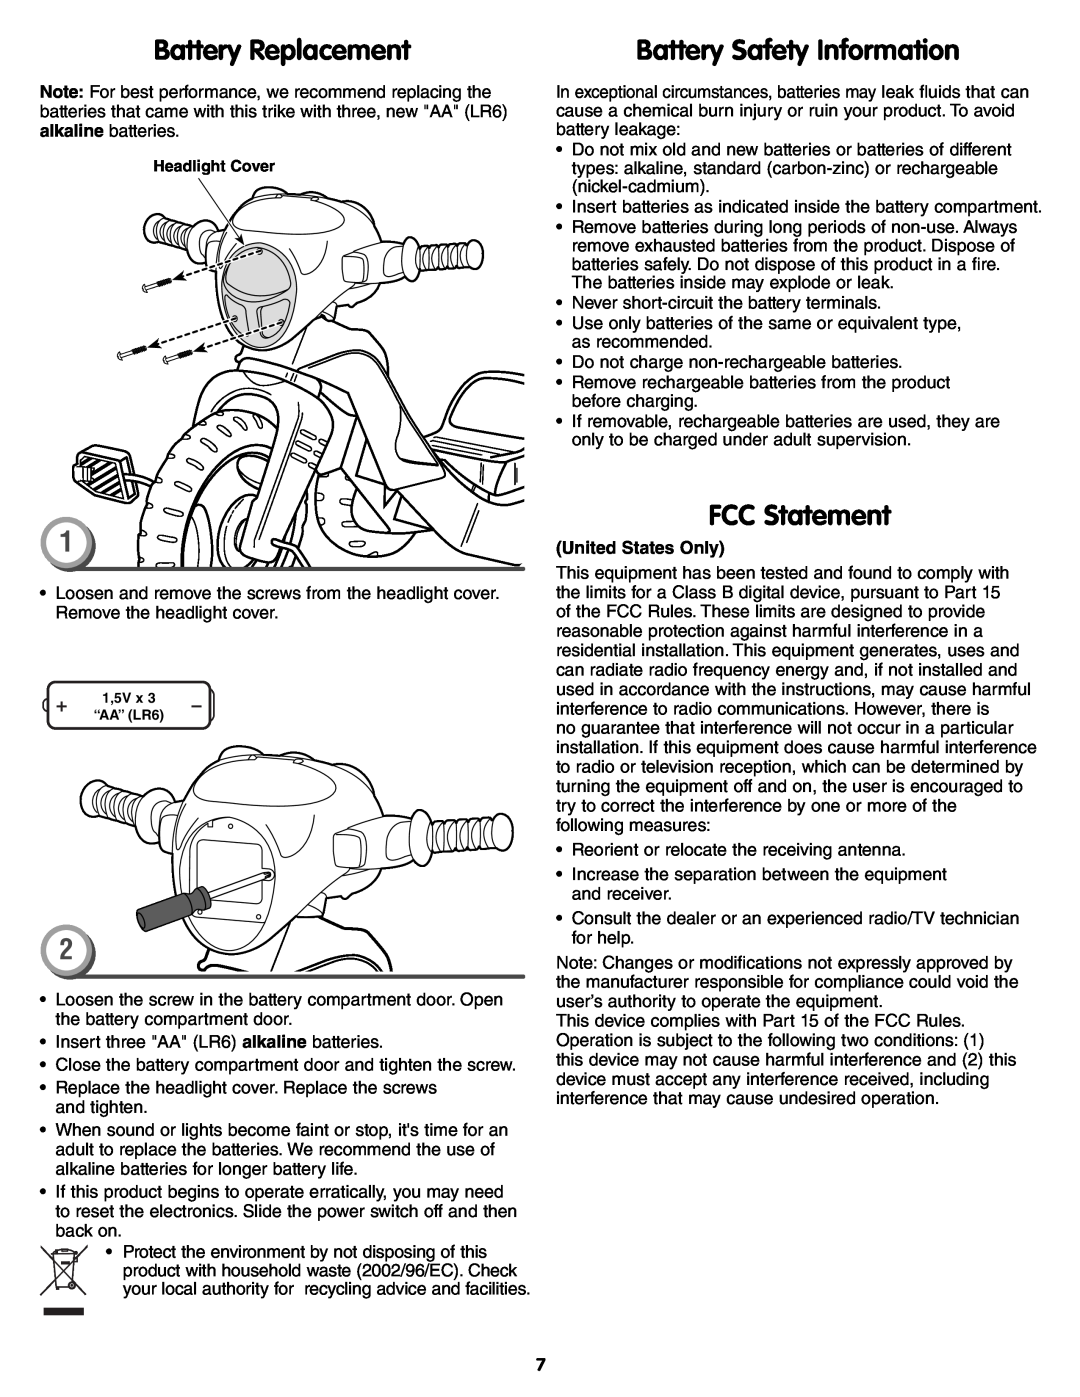 Fisher-Price X6020 instruction sheet Battery Replacement, FCC Statement, Battery Safety Information, United States Only 